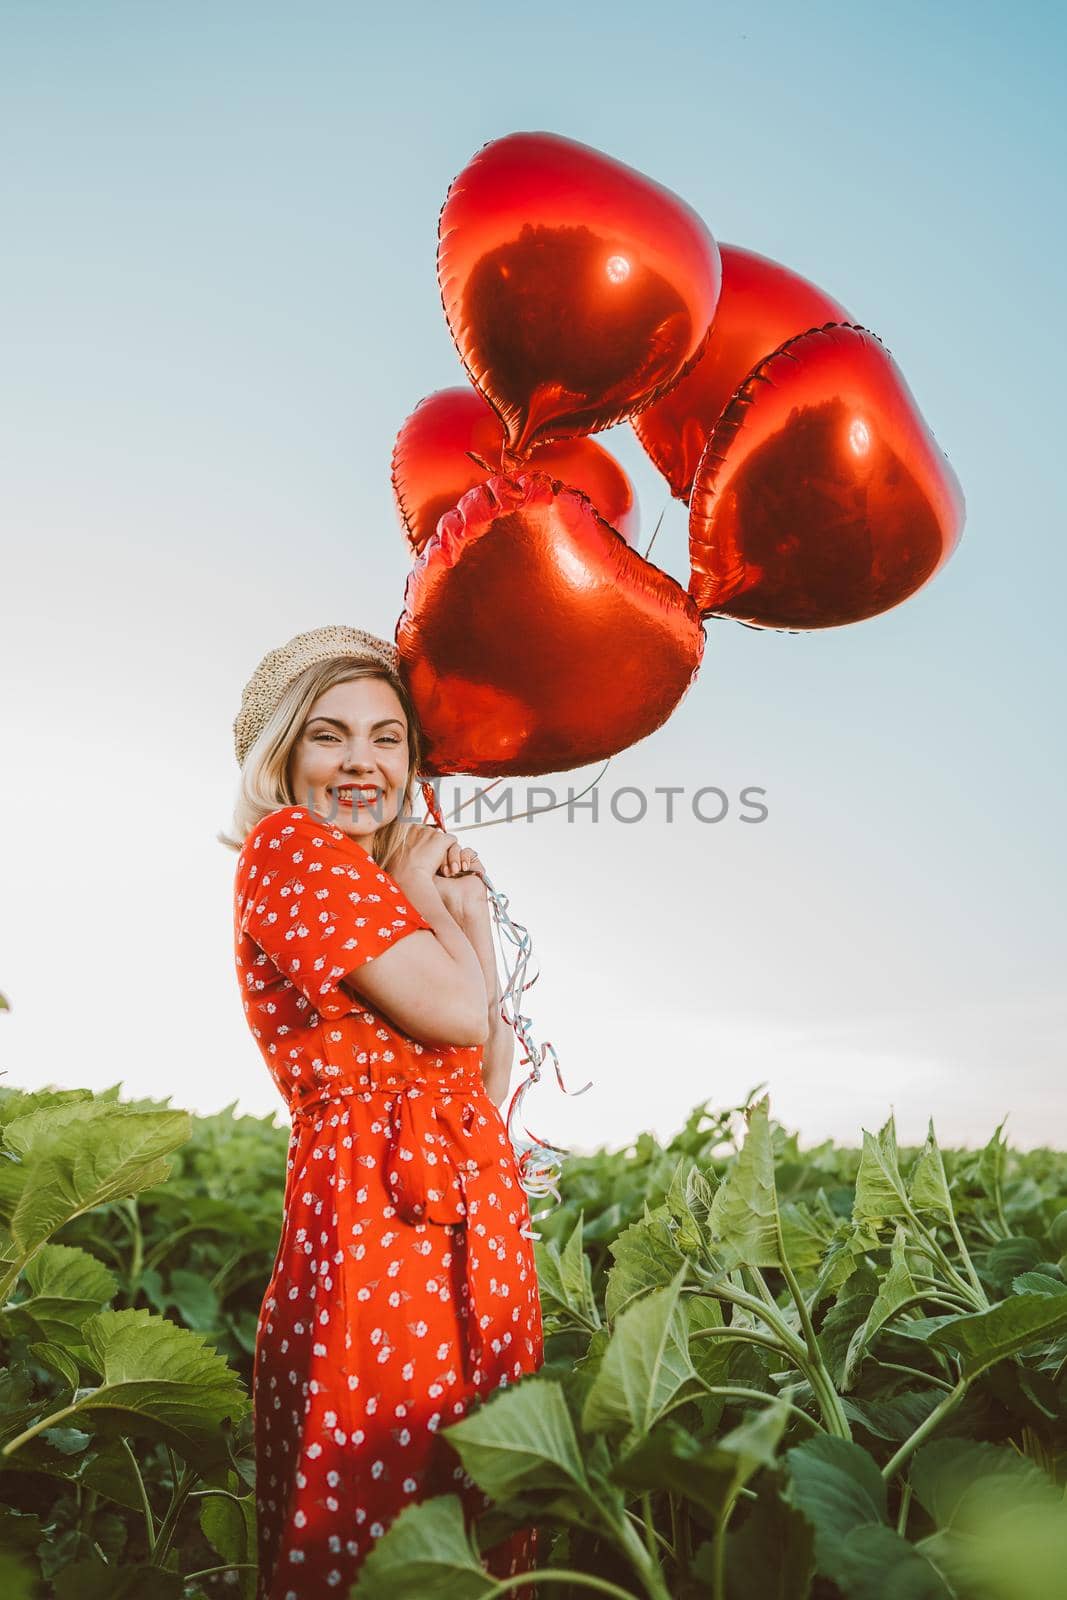 Portrait of attractive woman in red dress posing with heart-shaped balloons on green nature background. Girl in straw vintage hat or beret. Birthday, holiday, celebrate freedom concept. High quality